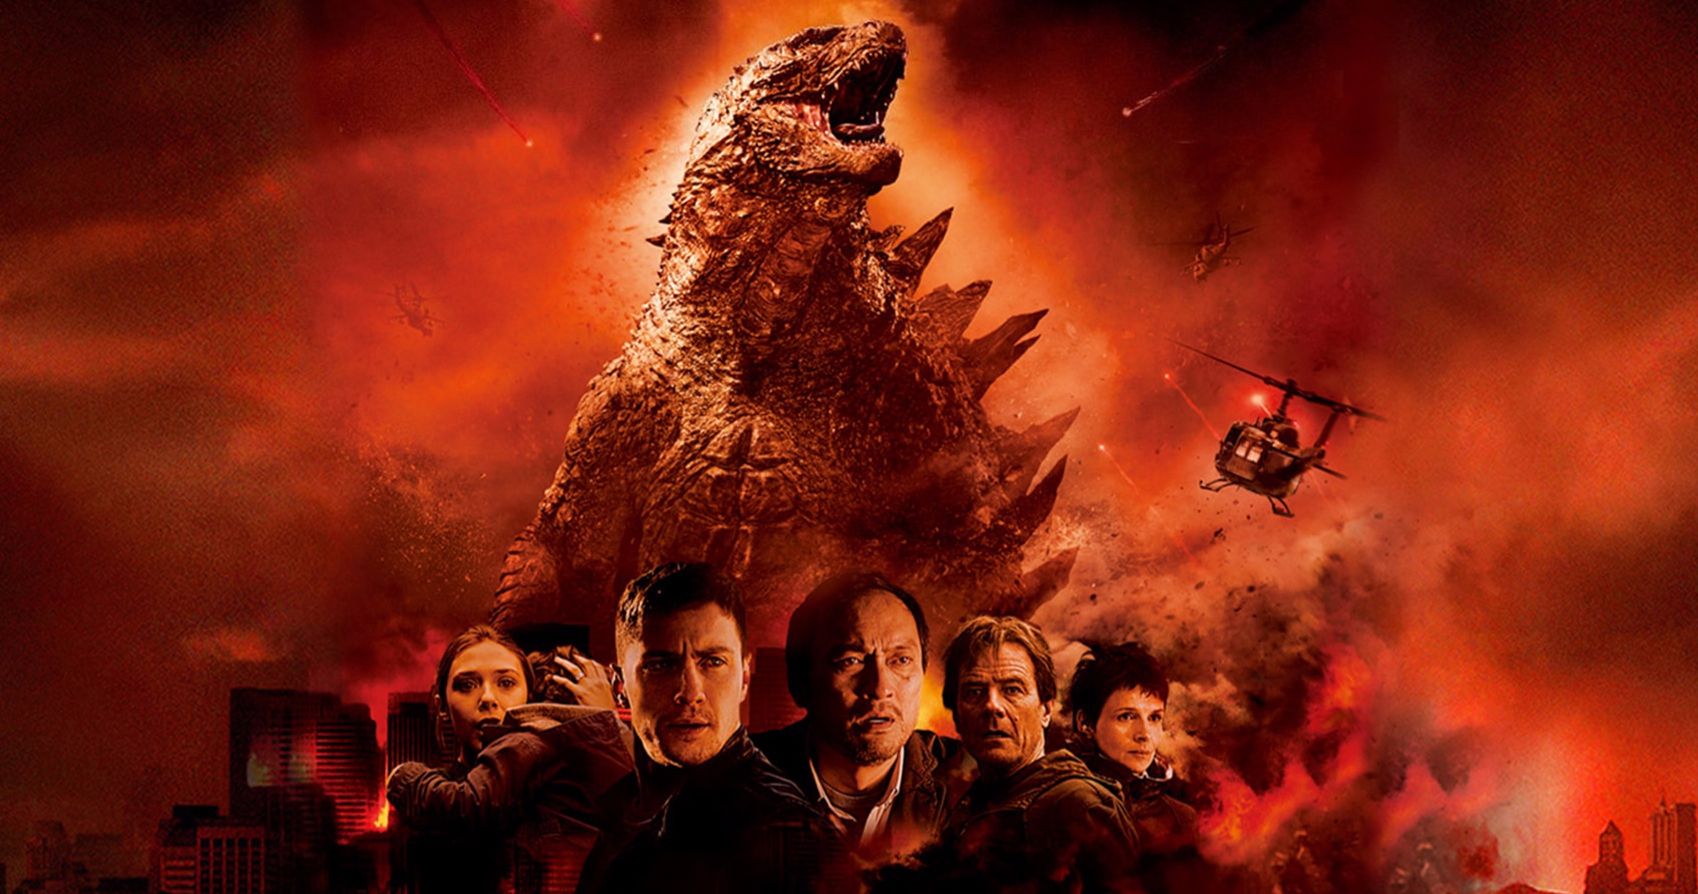 Godzilla 2014 Five Years Later: Is It Worth a Second Look?